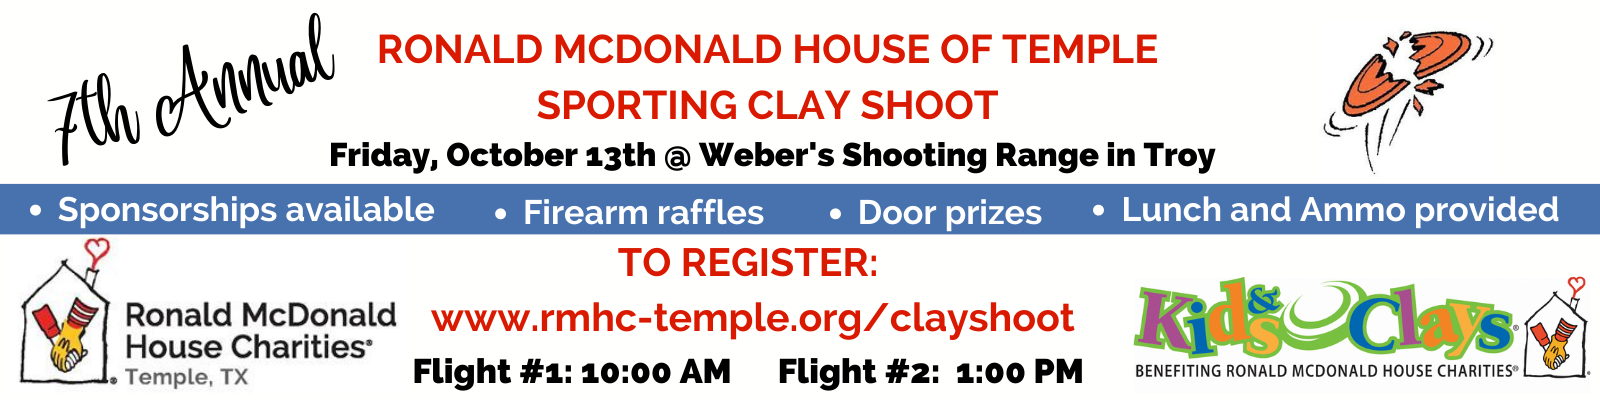 2023 Ronald McDonald House of Temple Texas Sporting Clay Shoot Banner Image